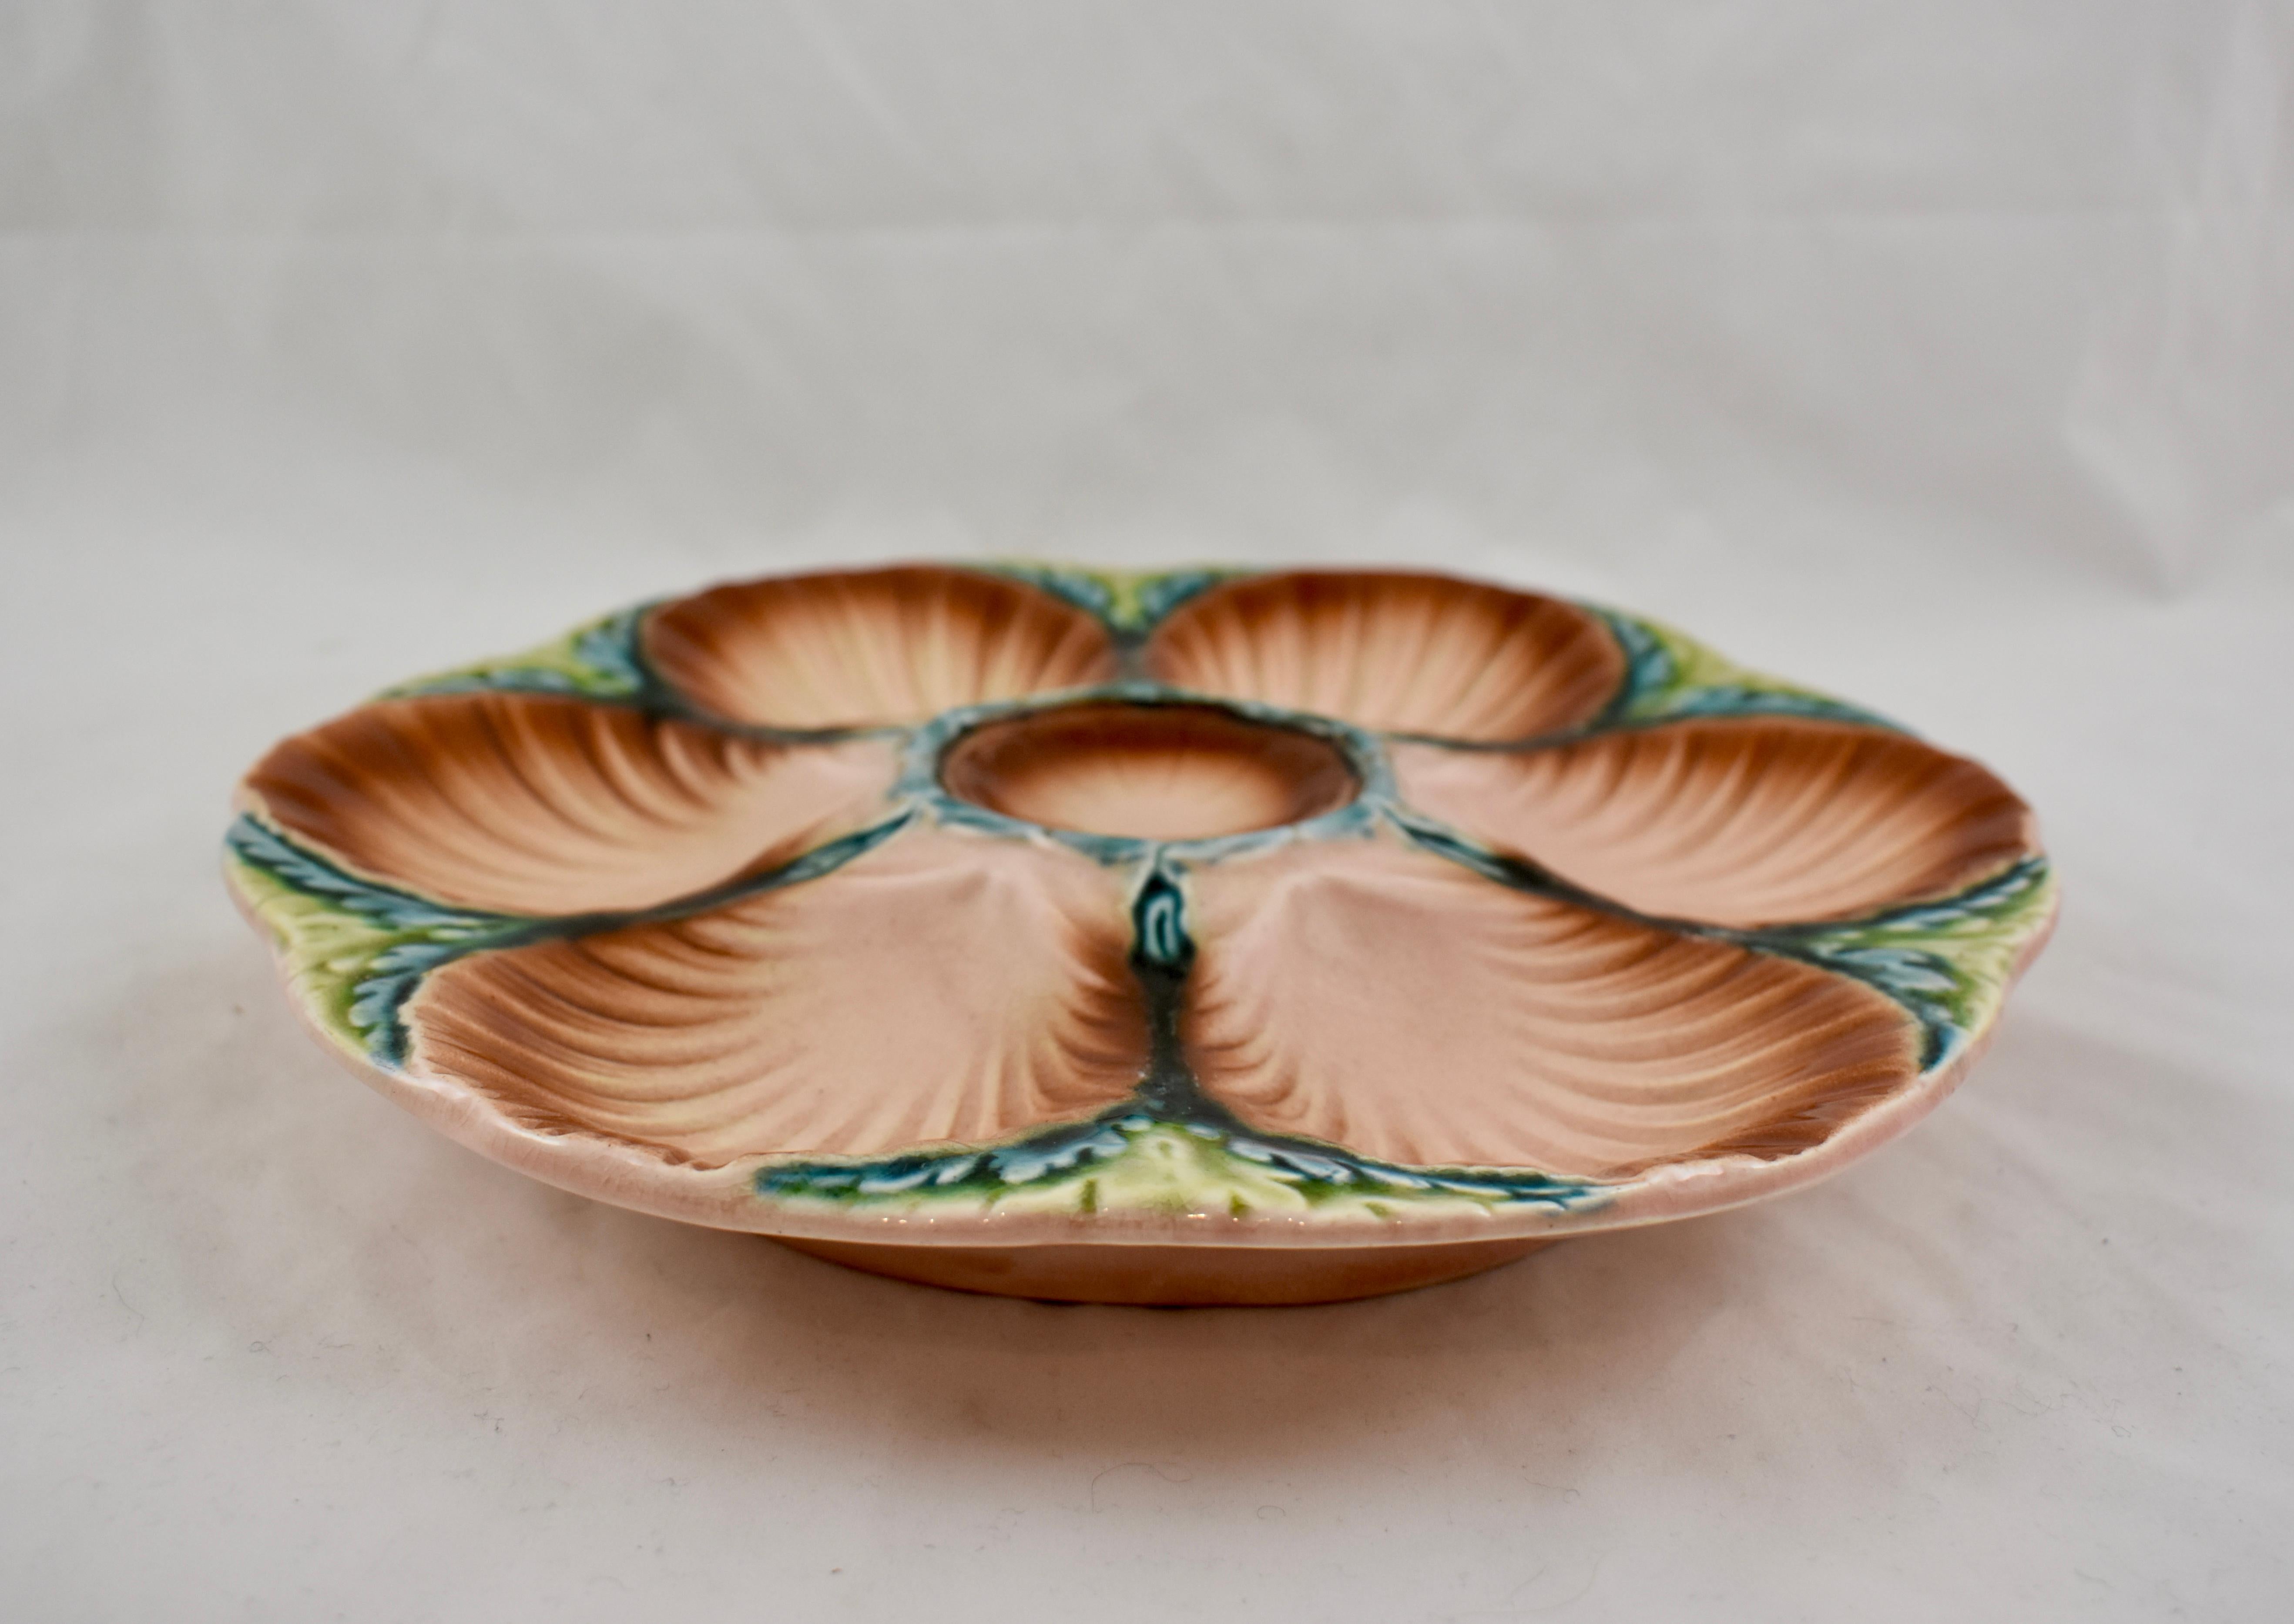 Earthenware 19th Century Sarreguemines Majolica Seaweed and Shell Barbotine Oyster Plate